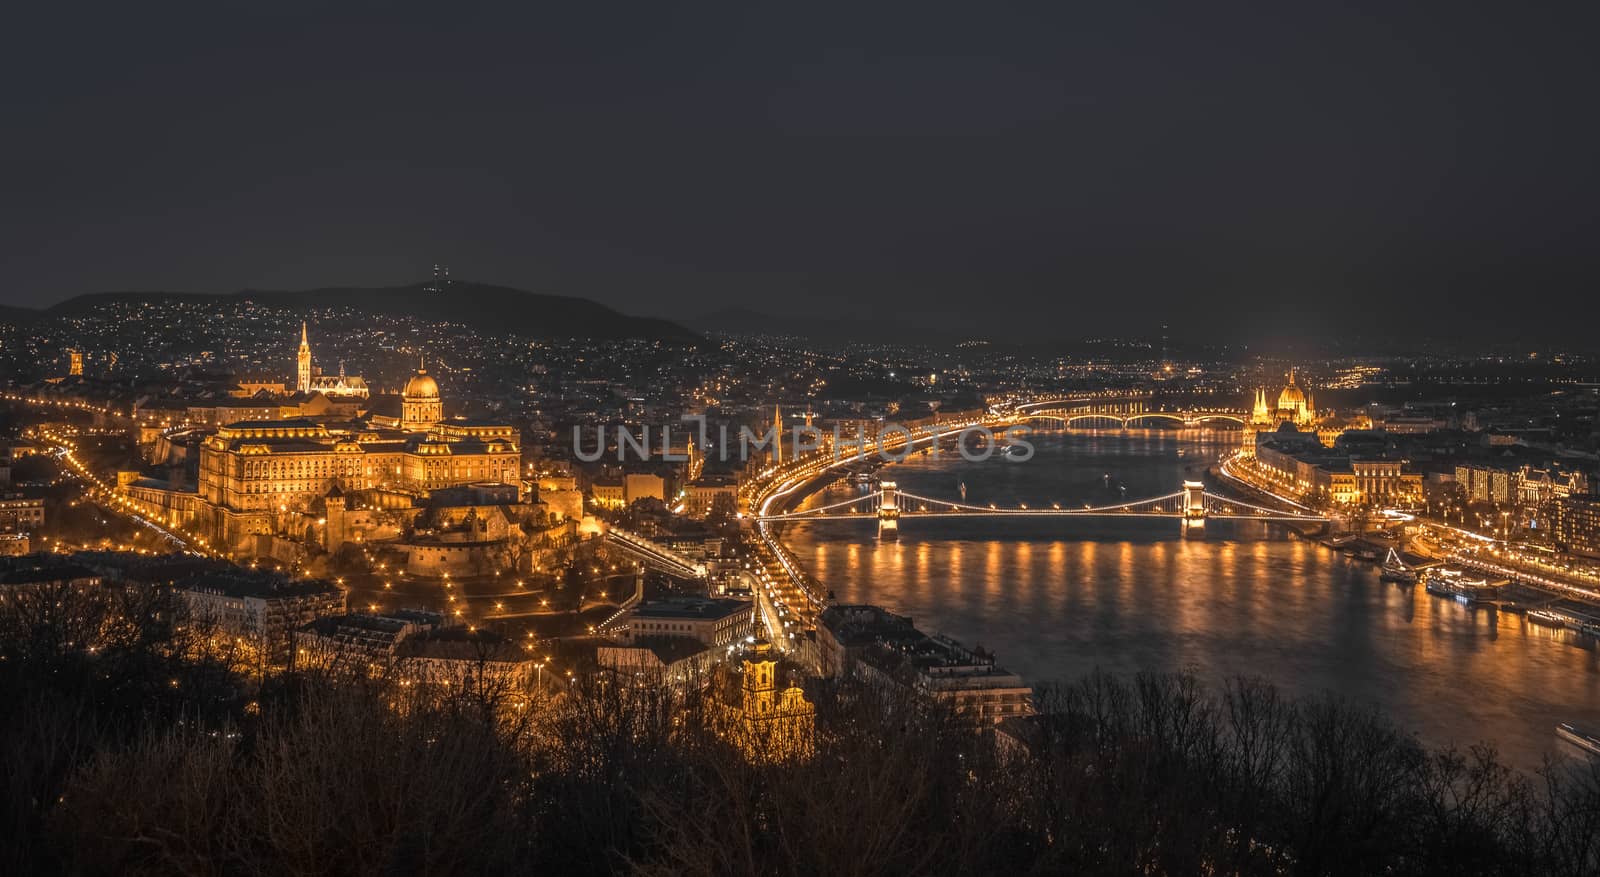 Panoramic View of Budapest with Street Lights and the Danube River at Night as Seen from Gellert Hill Lookout Point